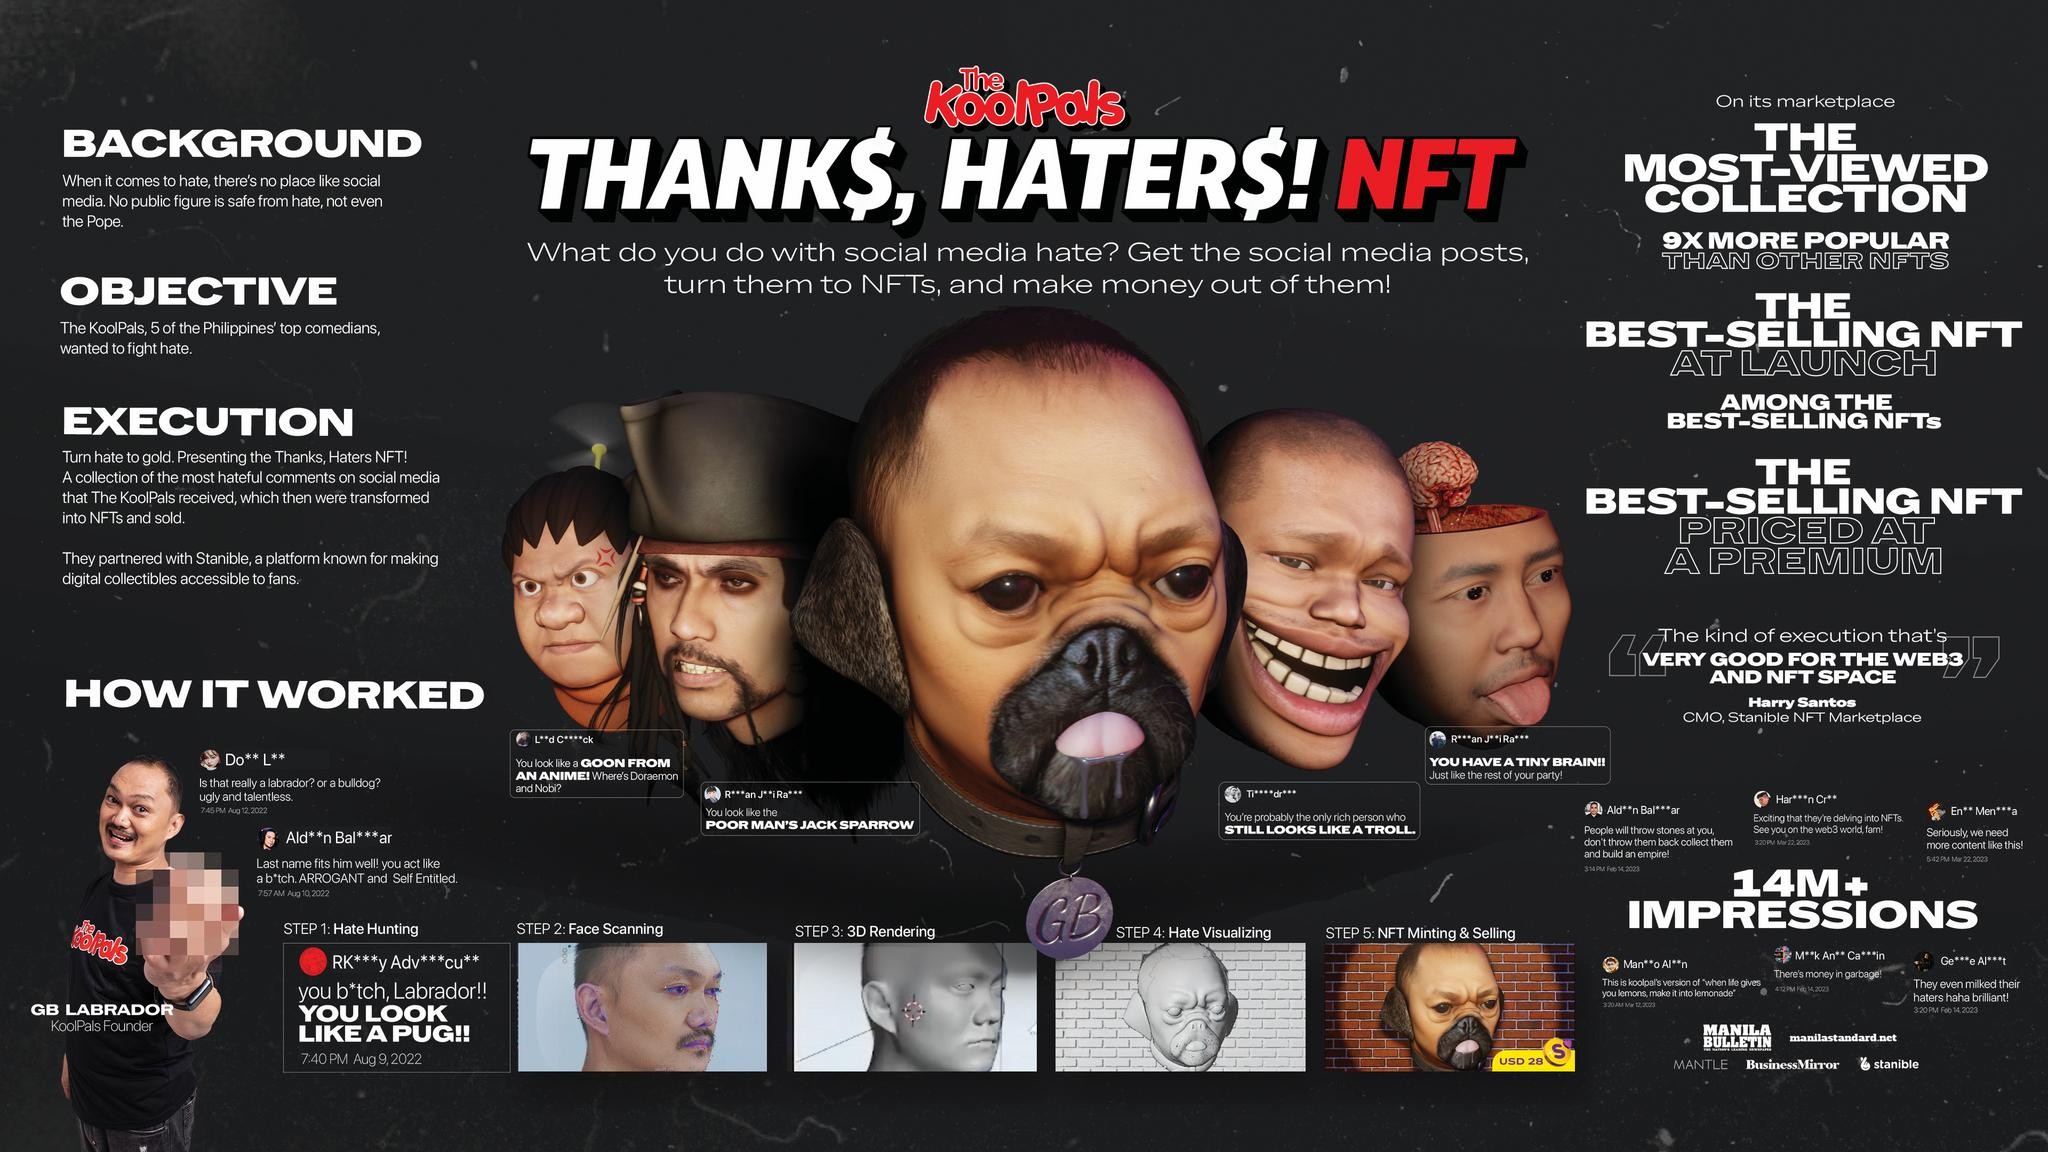 THANKS, HATERS! NFT